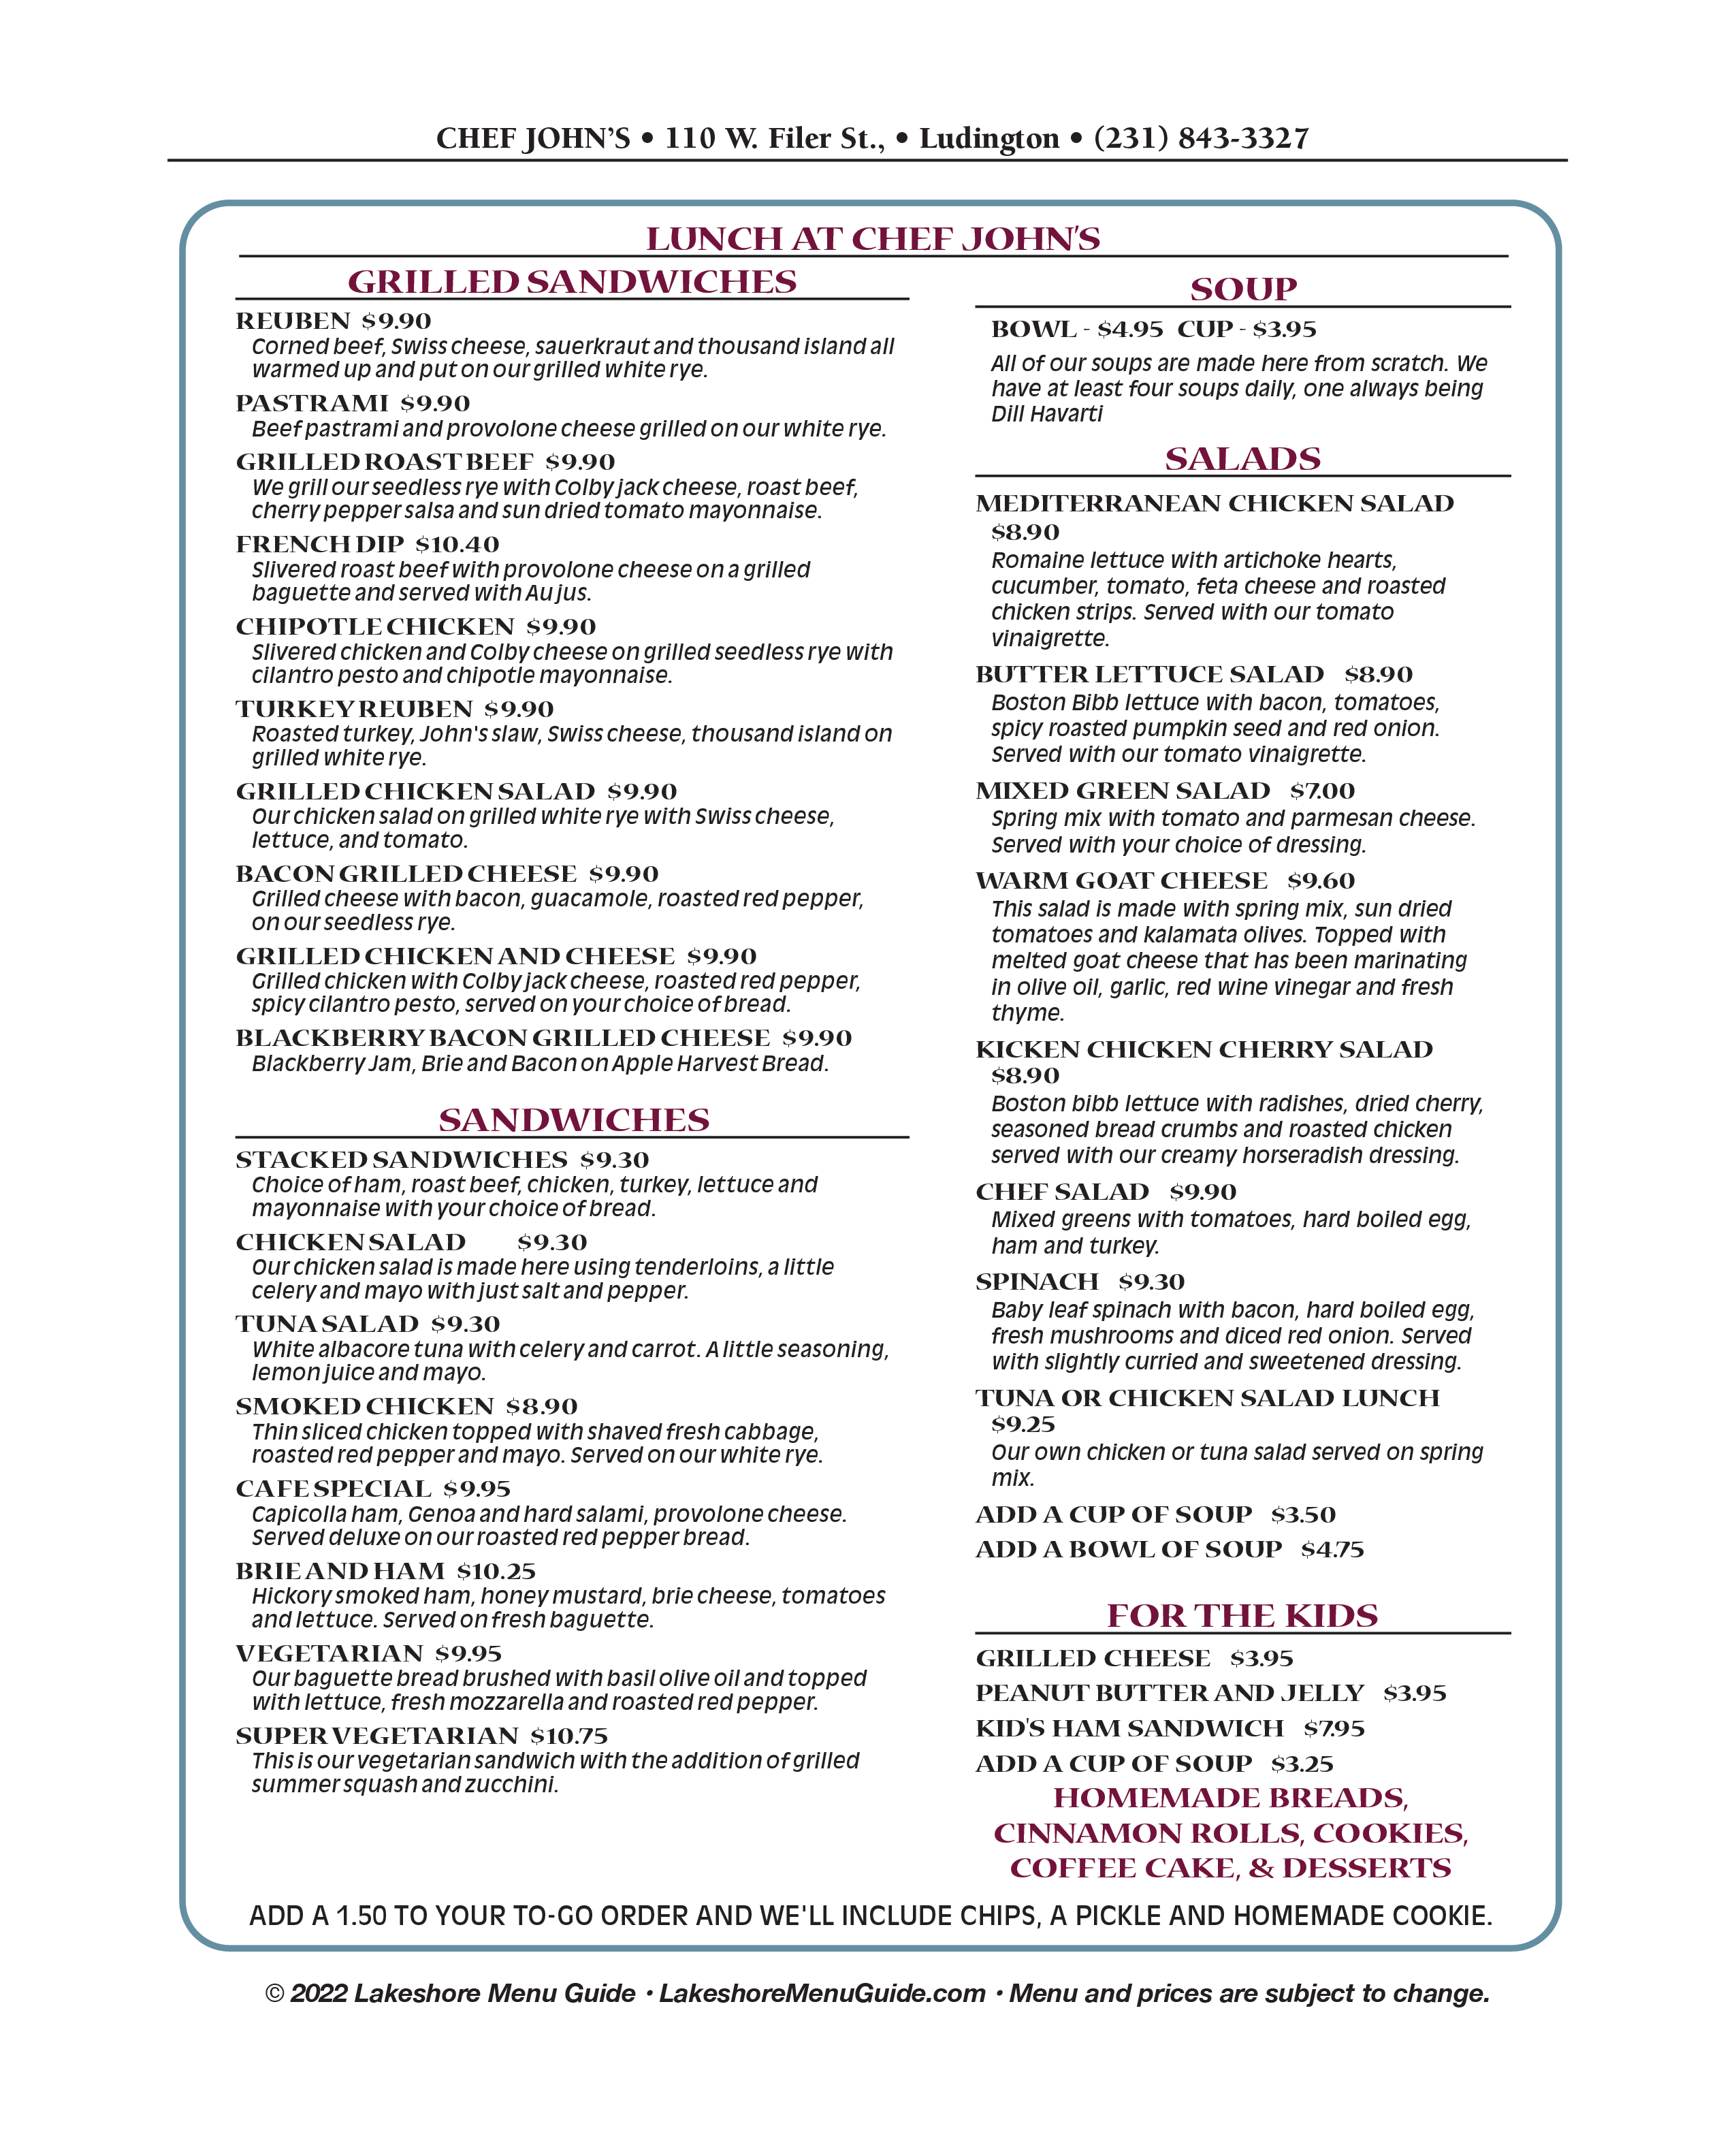 Menu for Chef Johns Cafe and Bakery in downtown Ludington from the Lakeshore Menu Guide